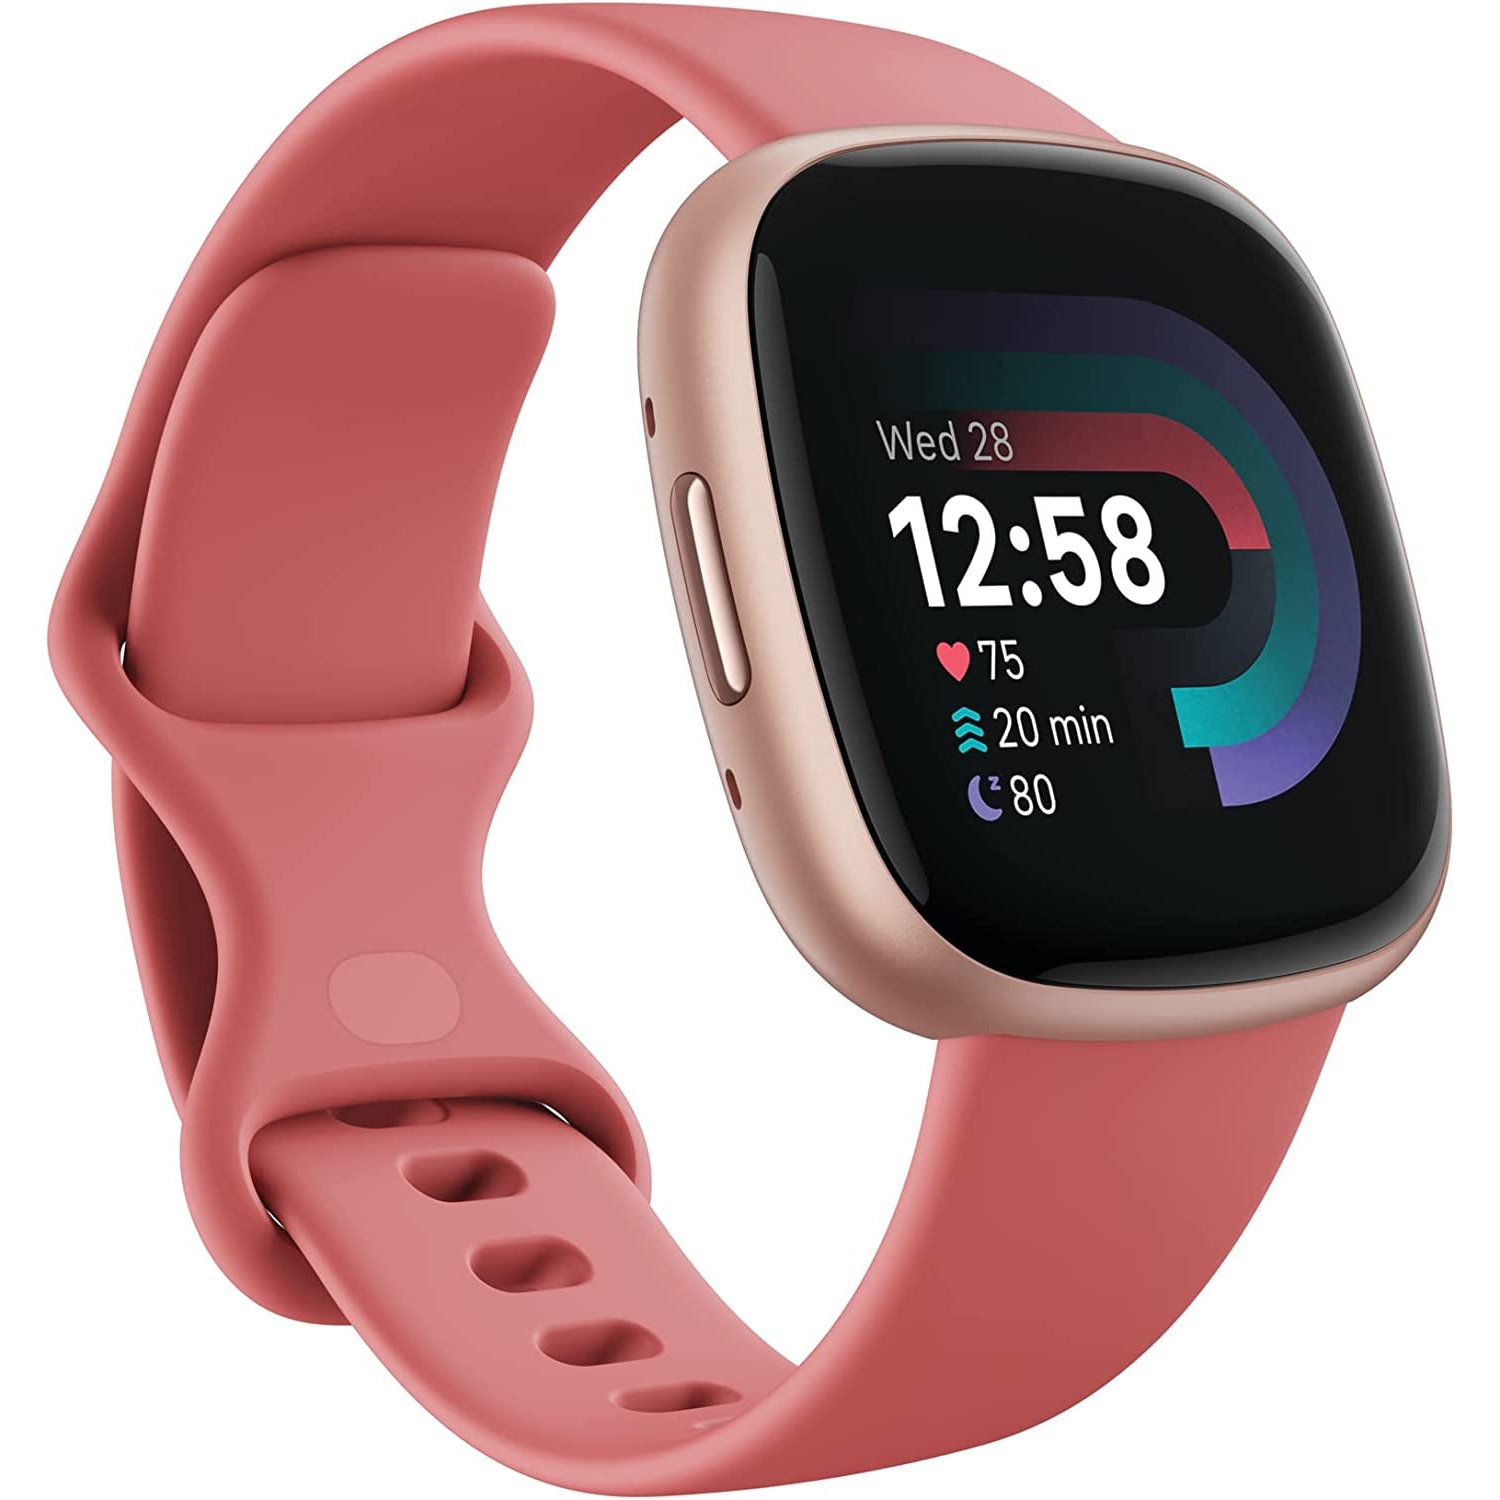 Fitbit Versa 4 Fitness Smartwatch with Daily Readiness, Gps, 24/7 Heart Rate, 40+ Exercise Modes, Sleep Tracking and More, Pink Sand/Copper Rose, One Size (S and L Bands Included)